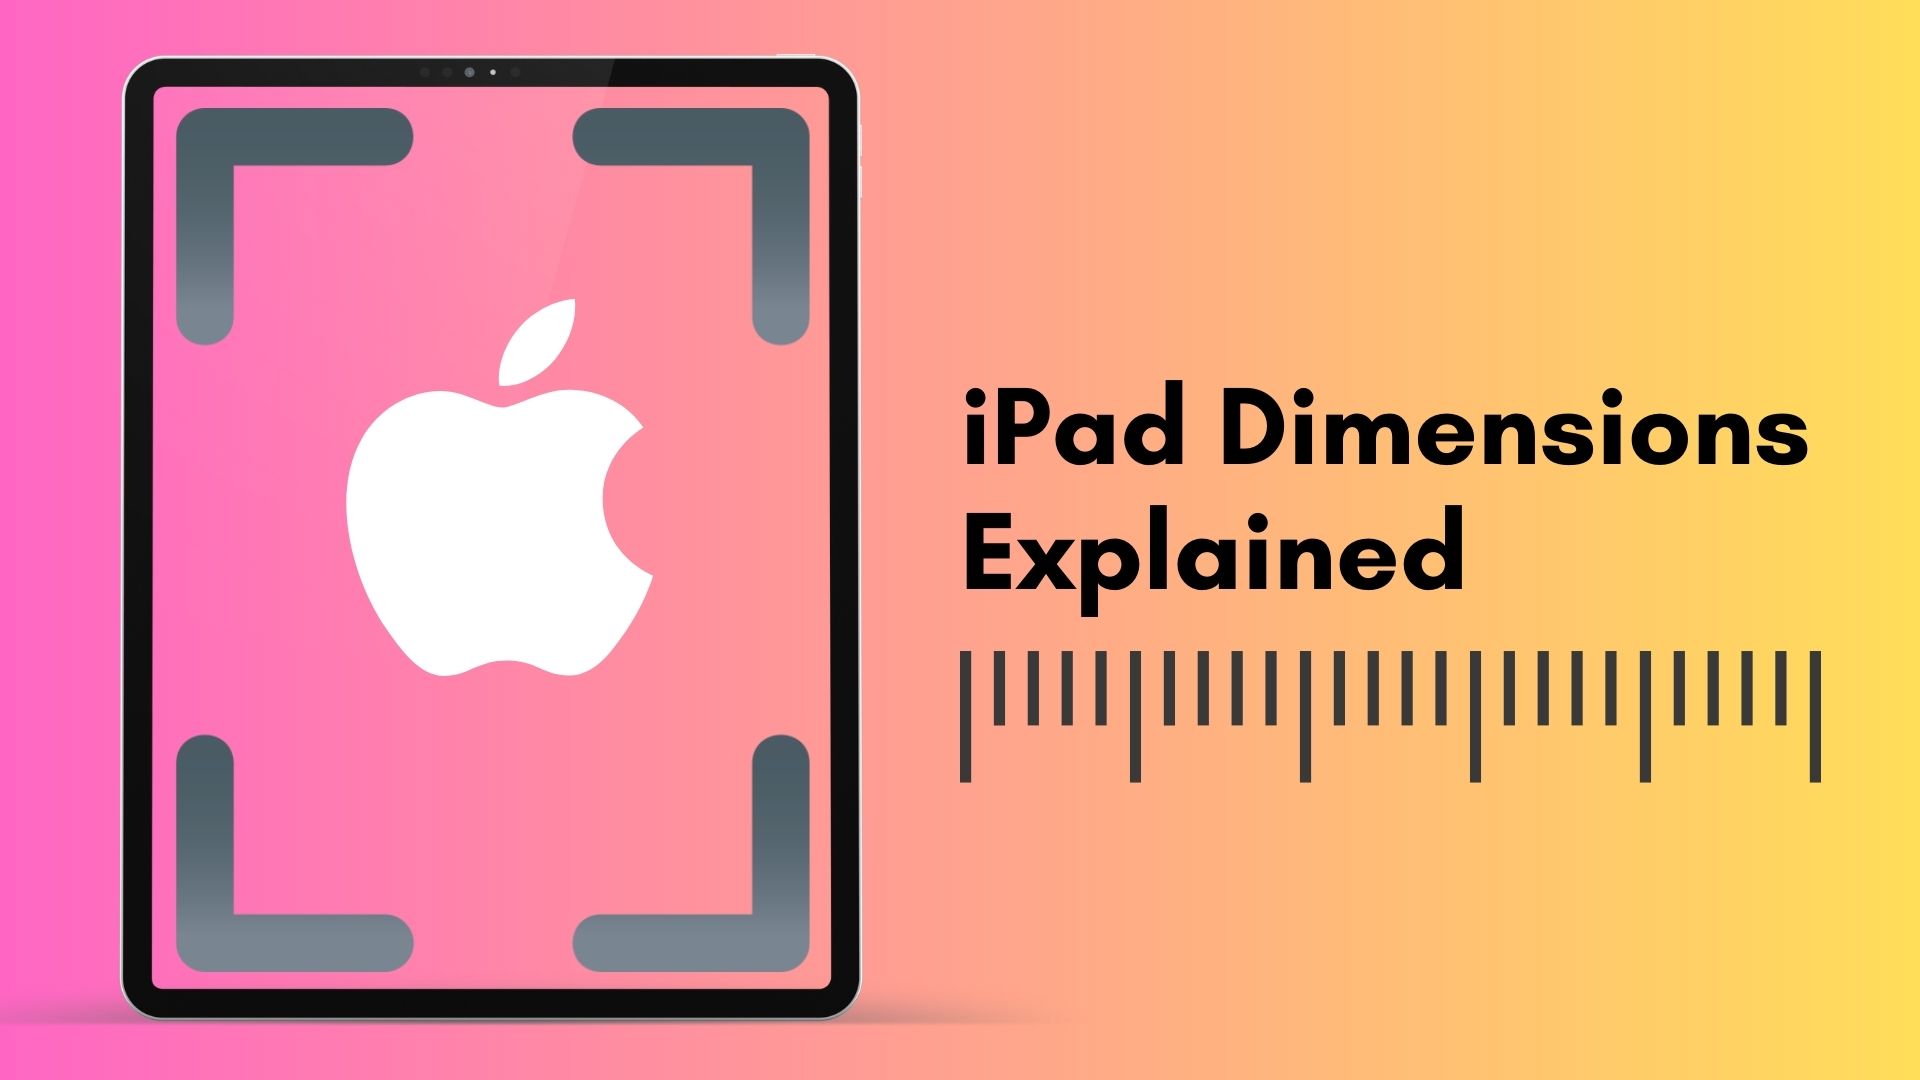 iPad size and Dimensions Explained